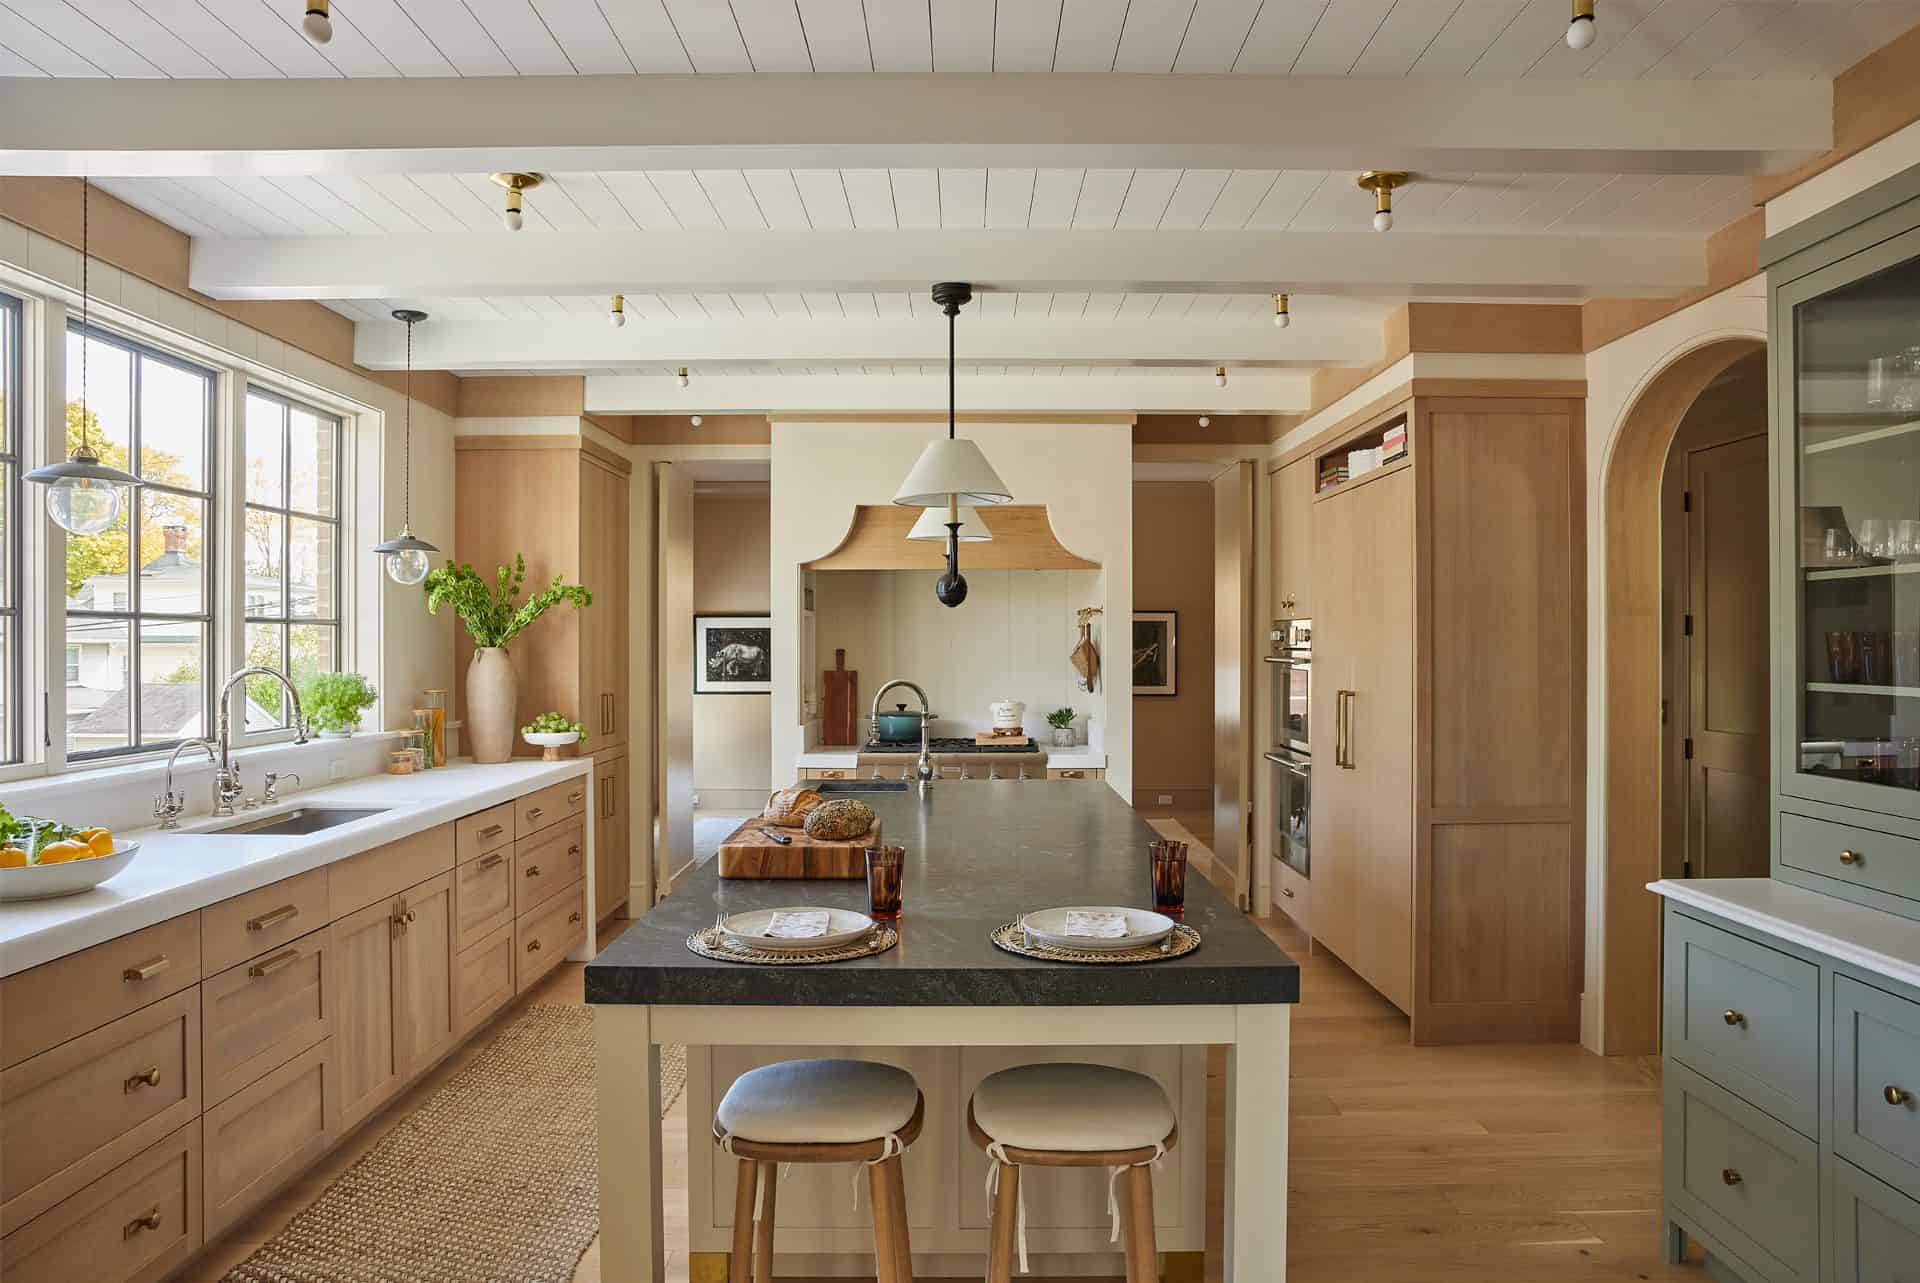 Overall view of kitchen with base oak cabinets on the left with a sink, long island with seating for two at the end, cooking nook in the back, paneled refrigerator and custom hutch on the right